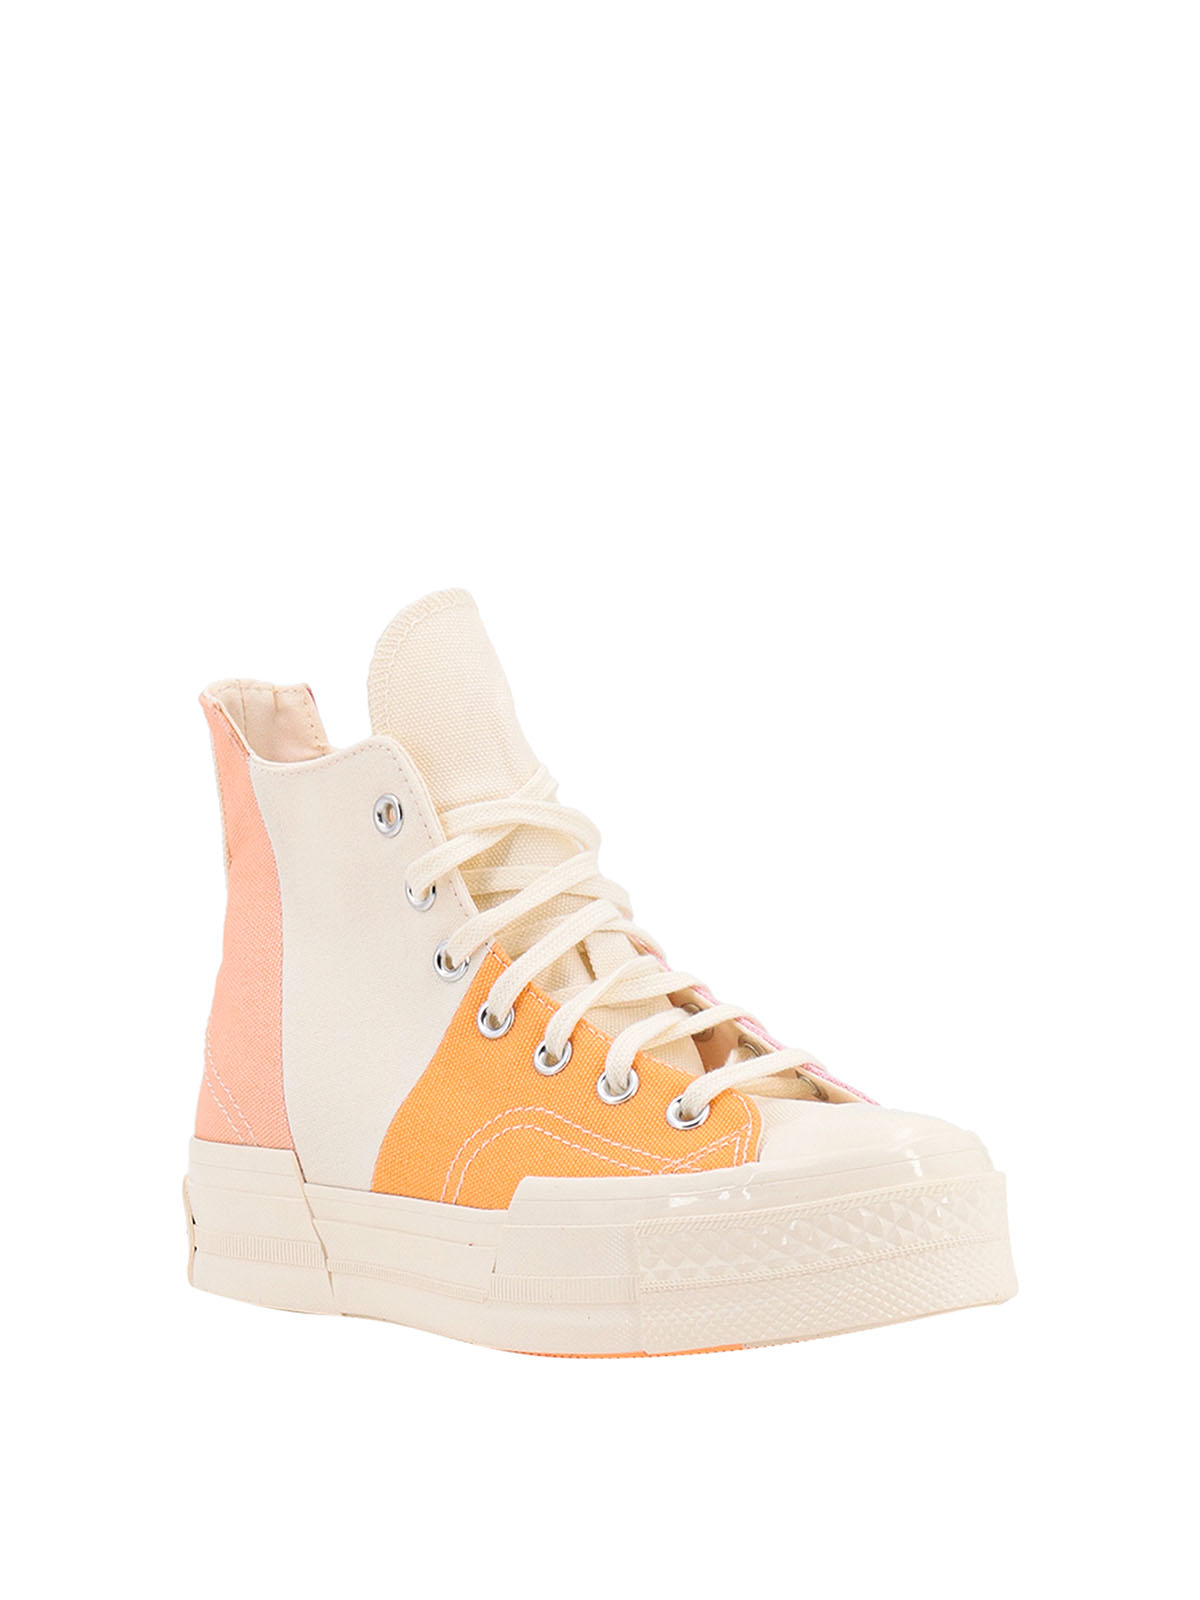 Shop Converse Canvas Sneakers In Pink